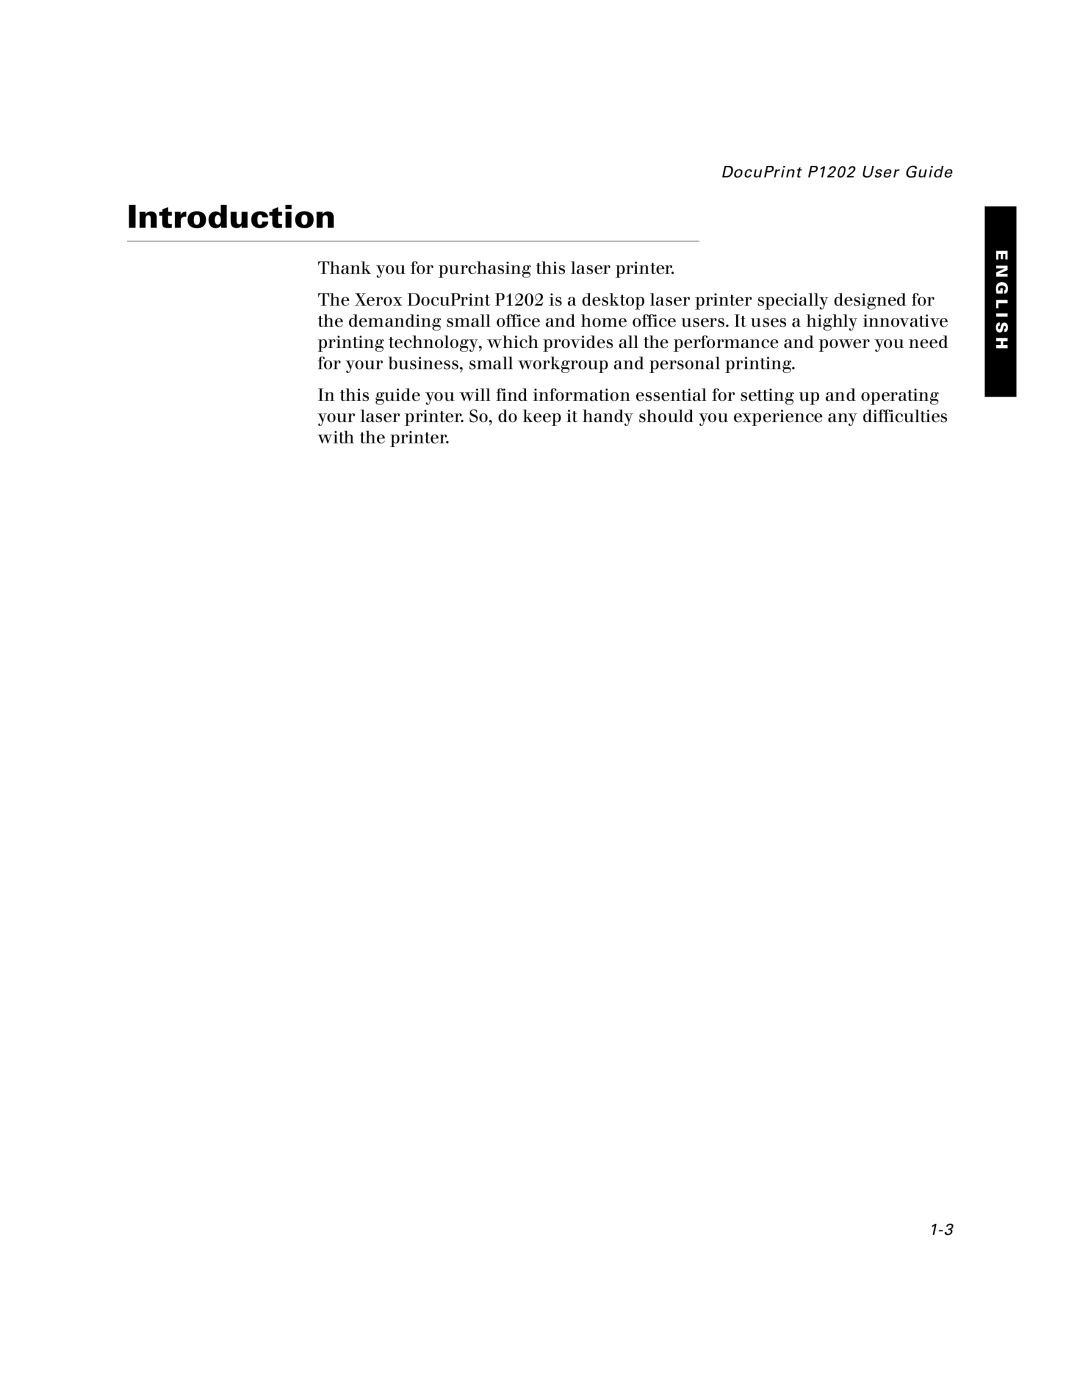 Xerox P1202 specifications Introduction 